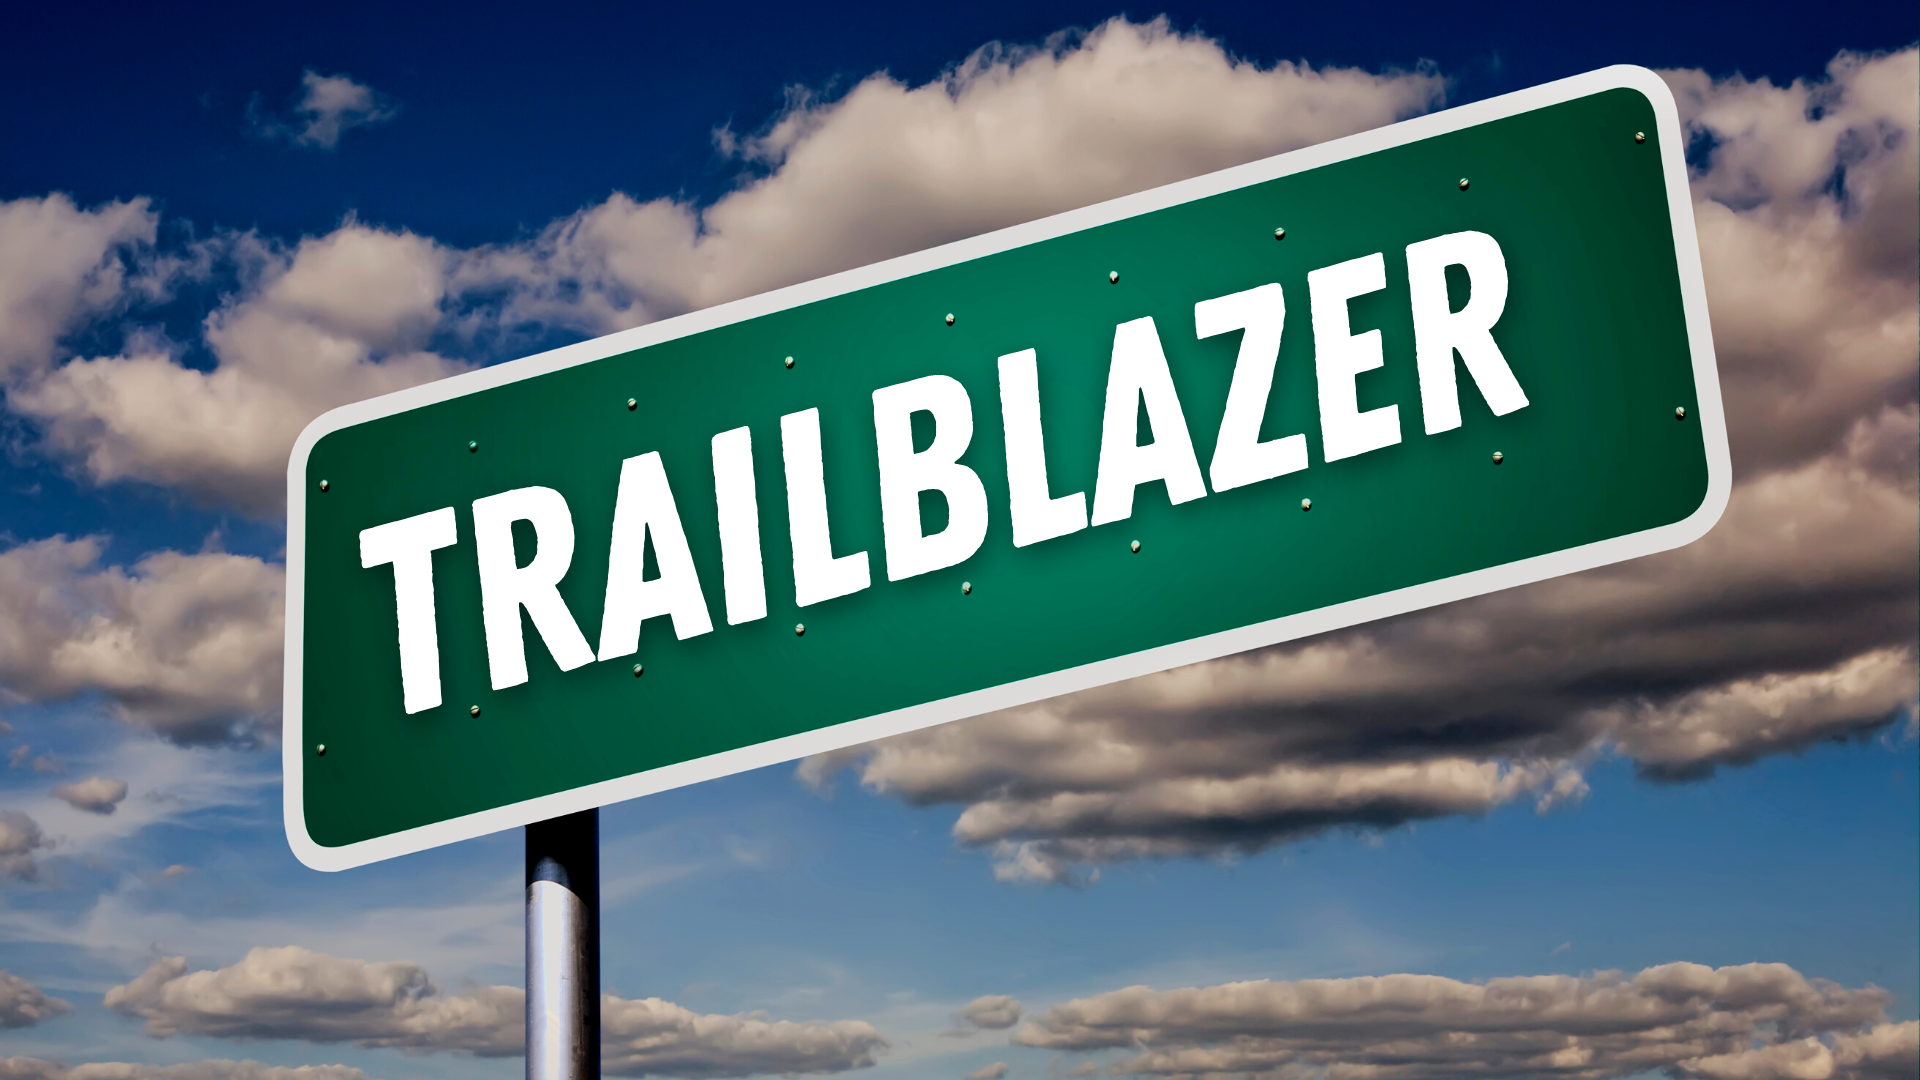 trail blazers meaning